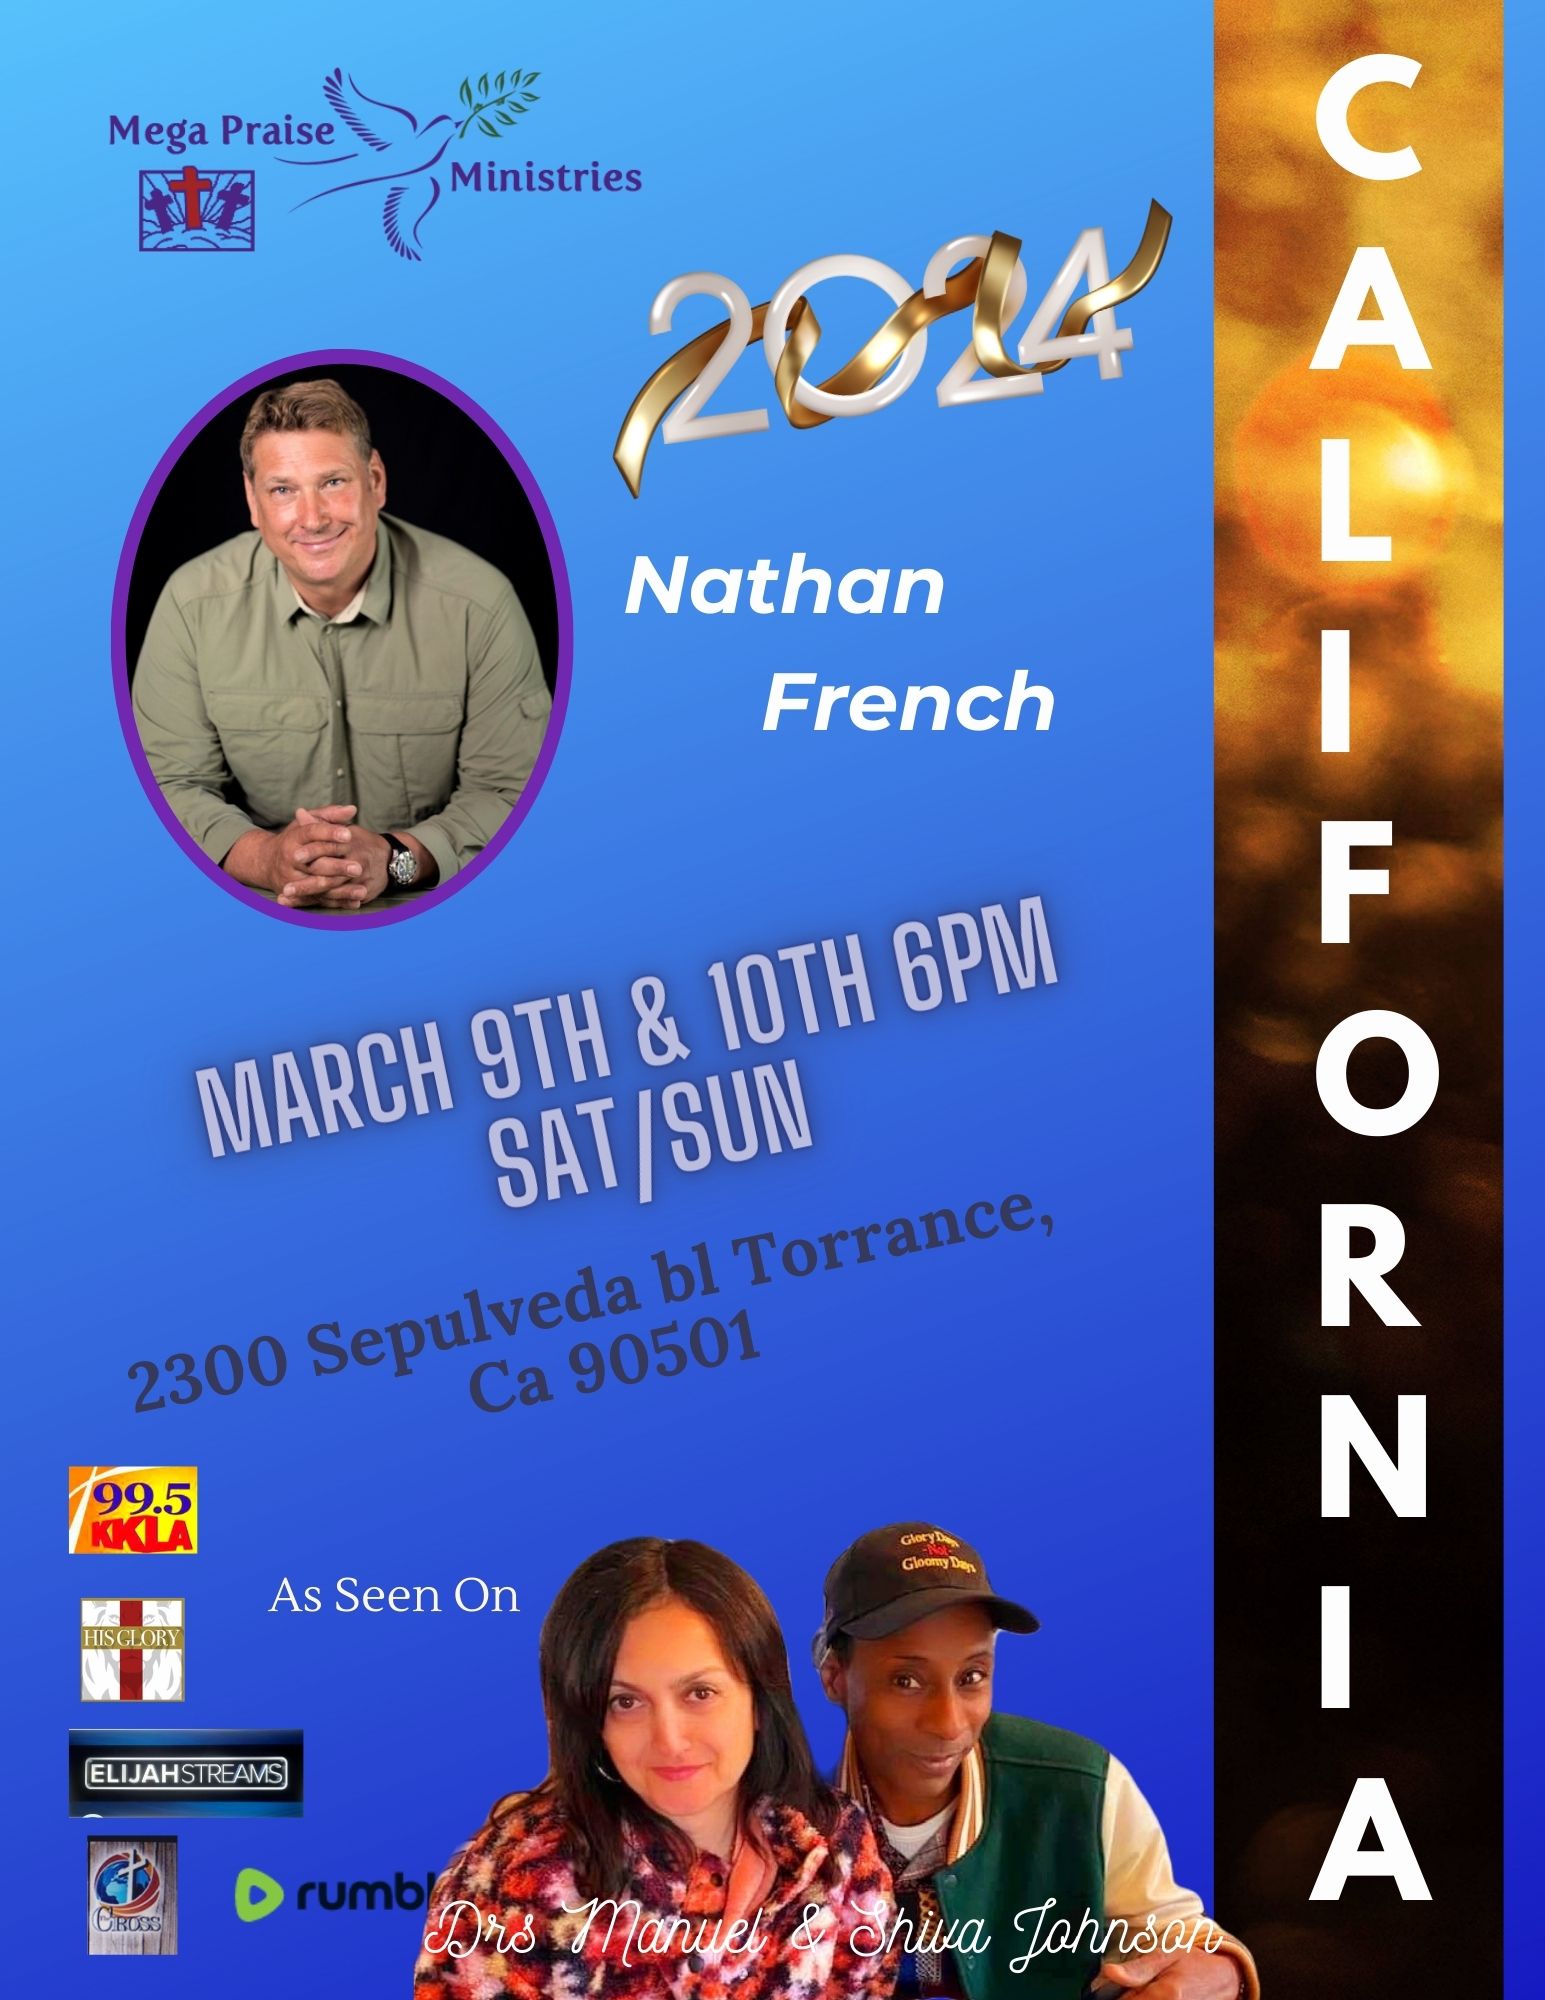 Nathan French event